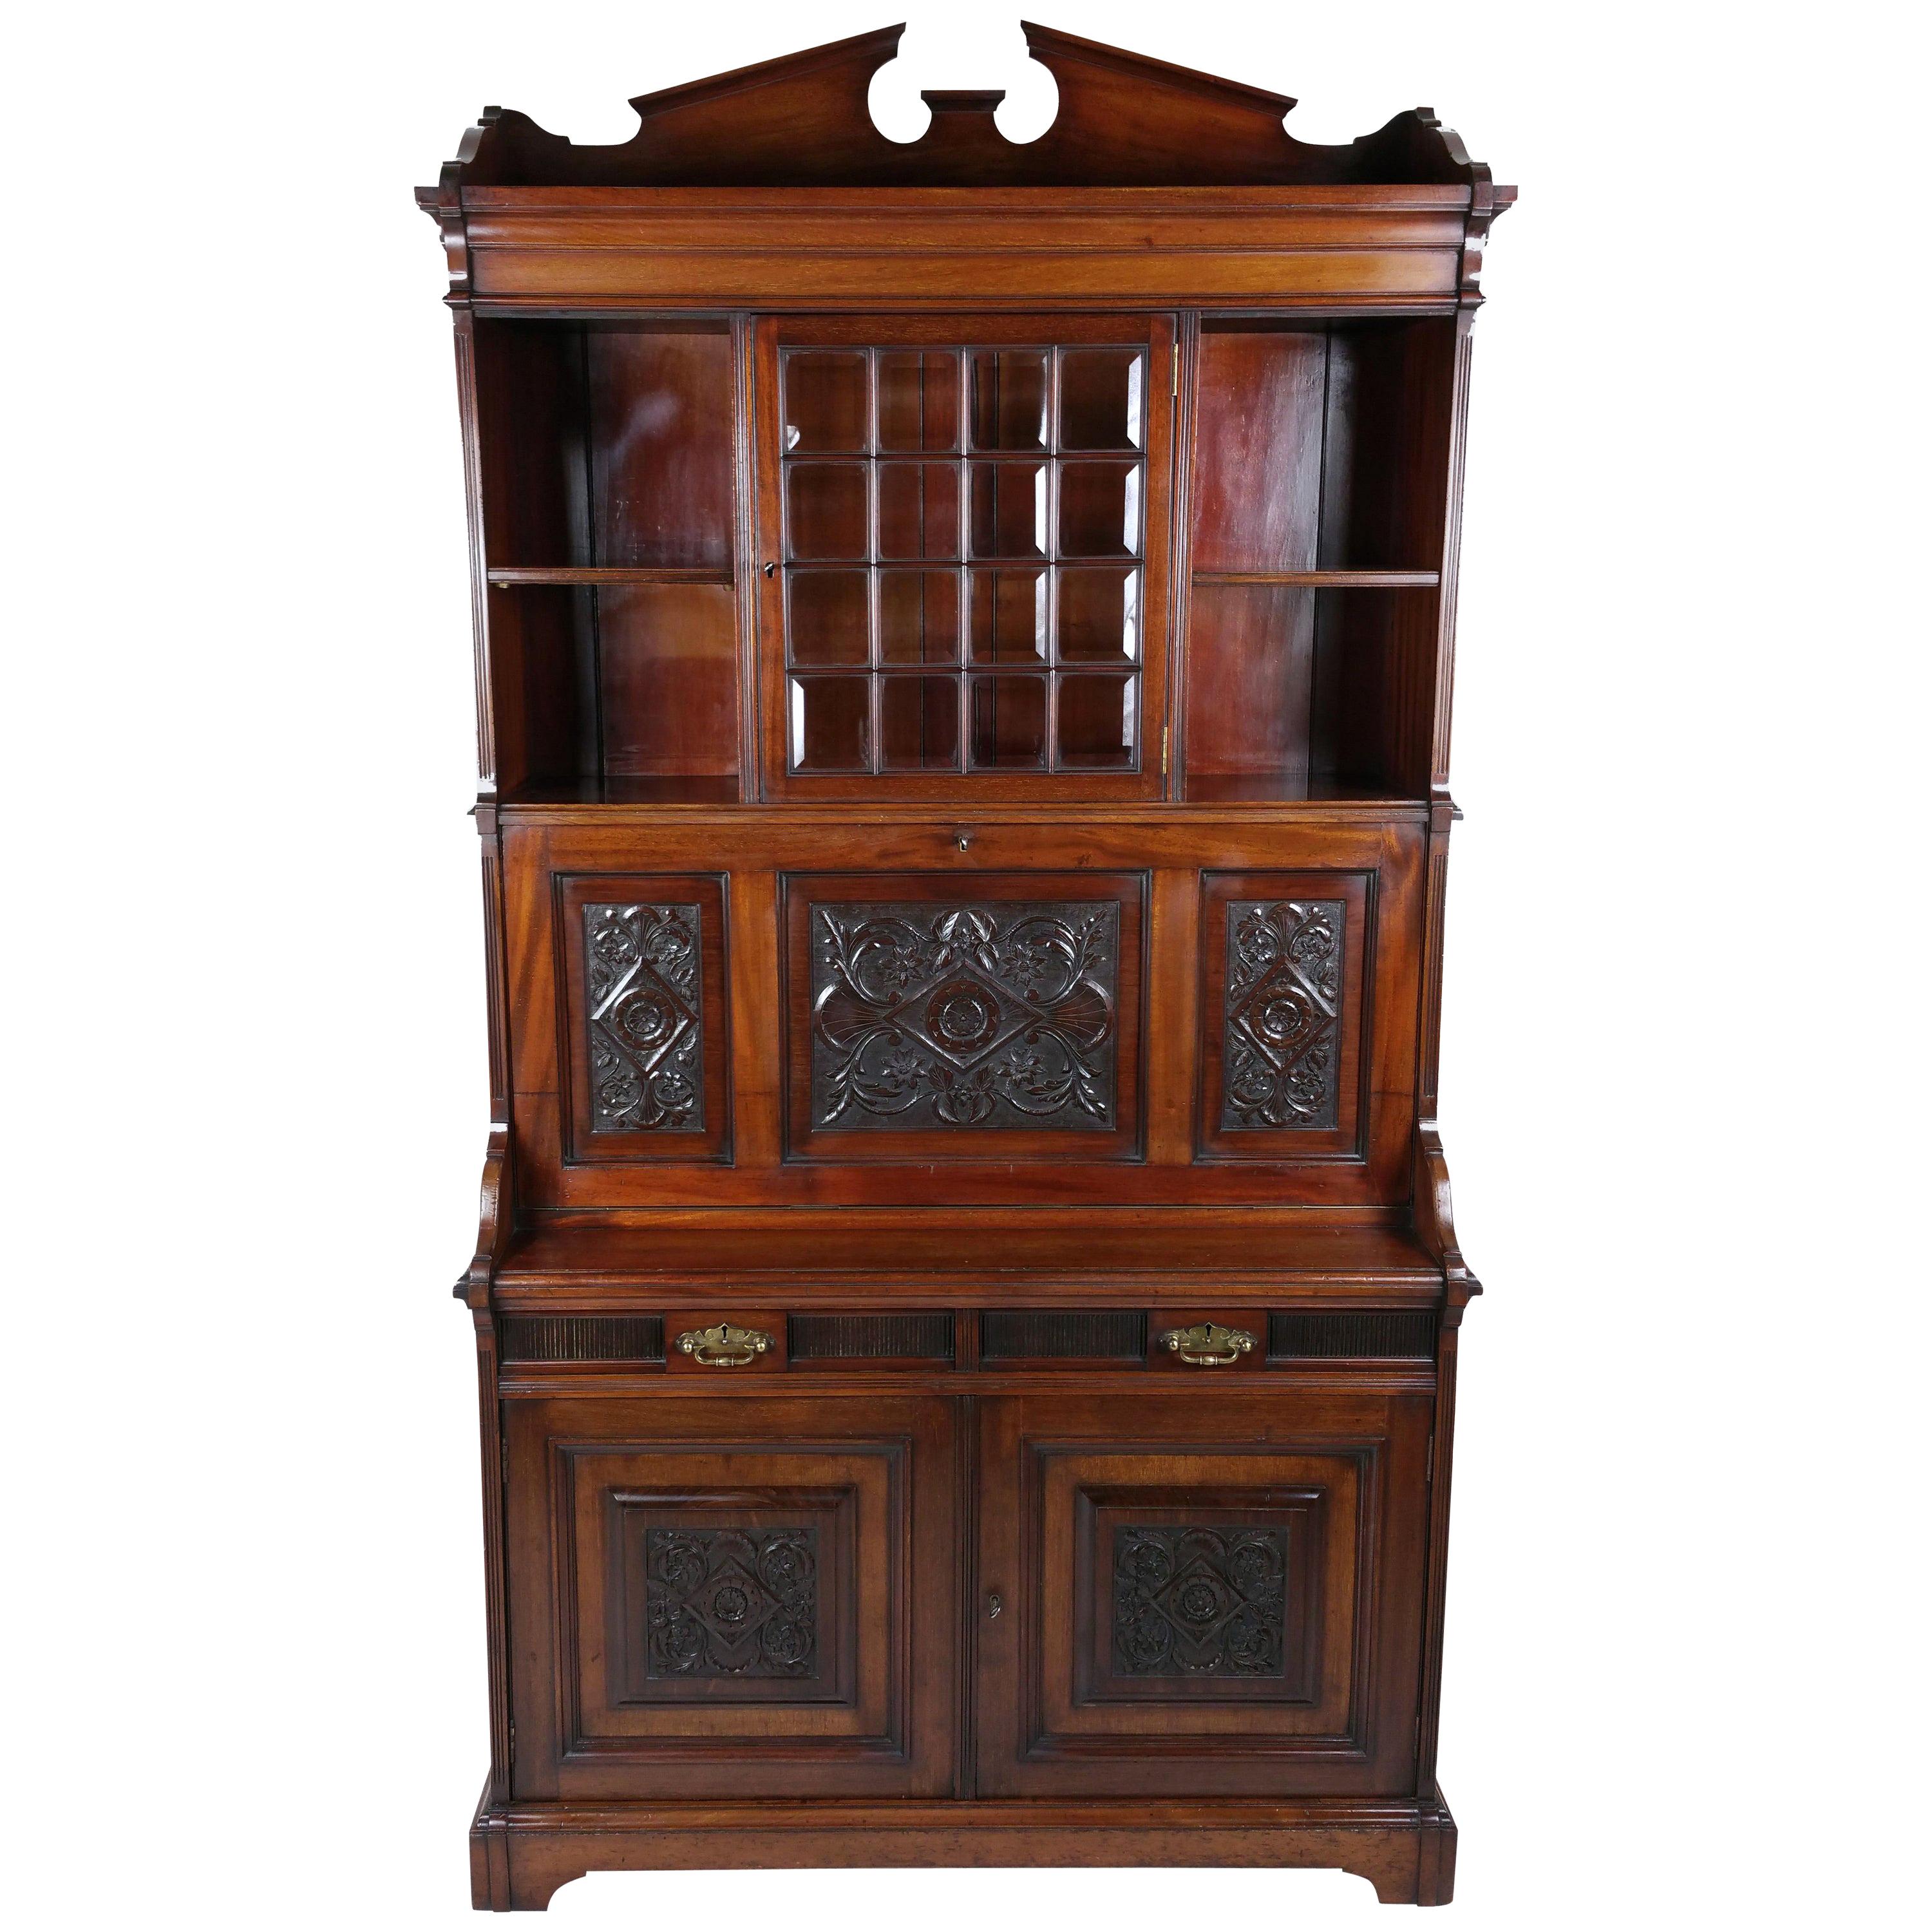 This outstanding and ornate Victorian Arts & Crafts walnut Secretaire cabinet features a central beveled glass door in between shelves on the top over a drop flap with a carved and fitted interior central space. The bottom half of the cabinet has